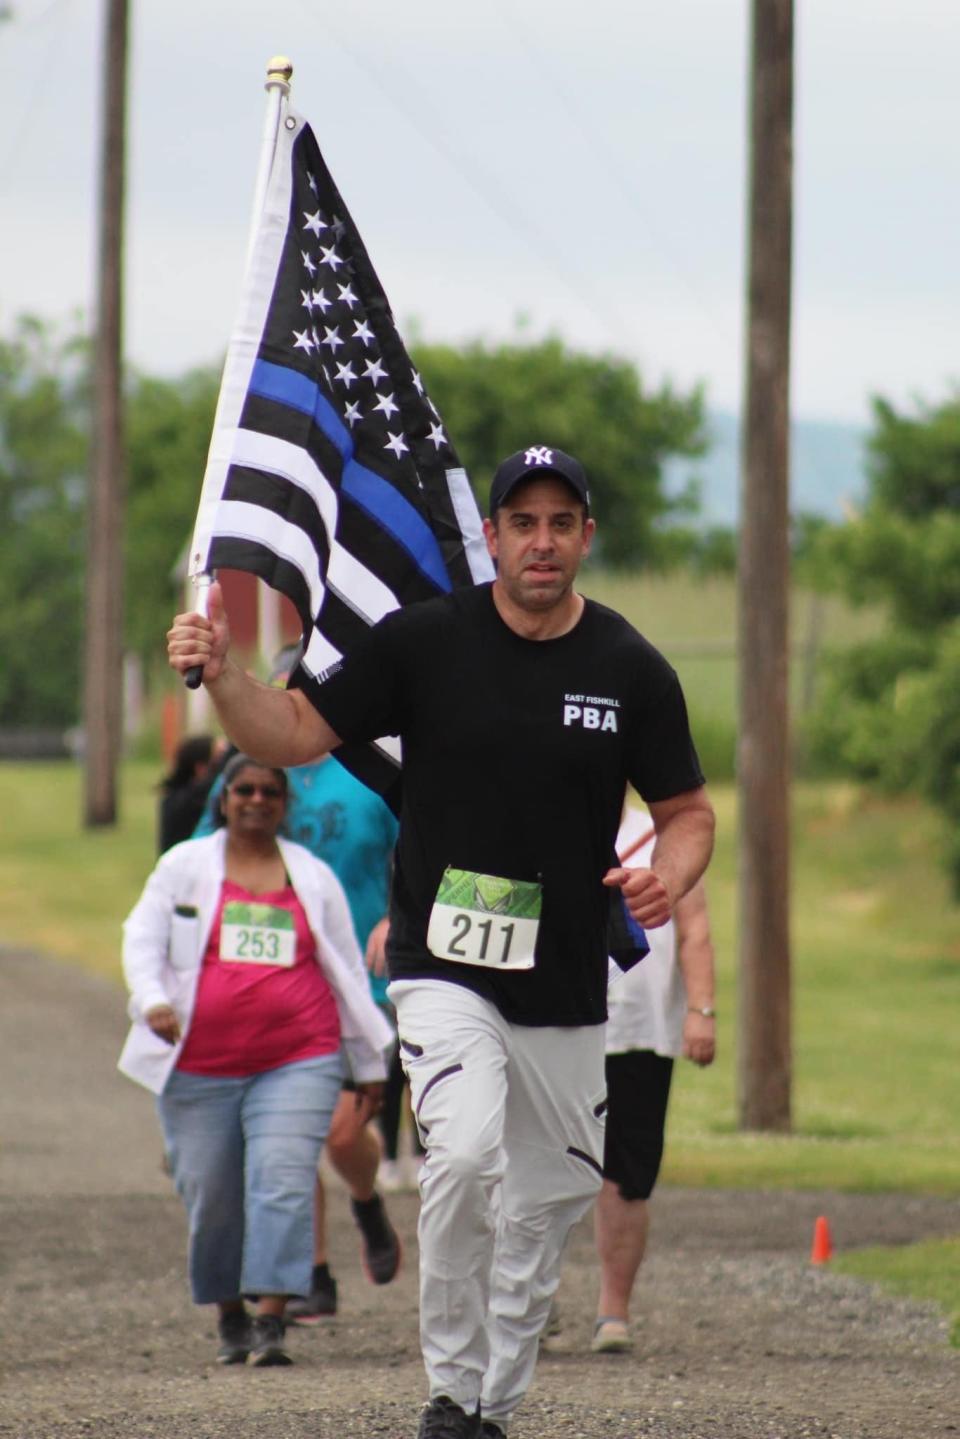 Officer Daniel P. DiDato at the Superhero 5K run for Sparrow's Nest at Barton Orchards in Poughquag on June 3, 2023.